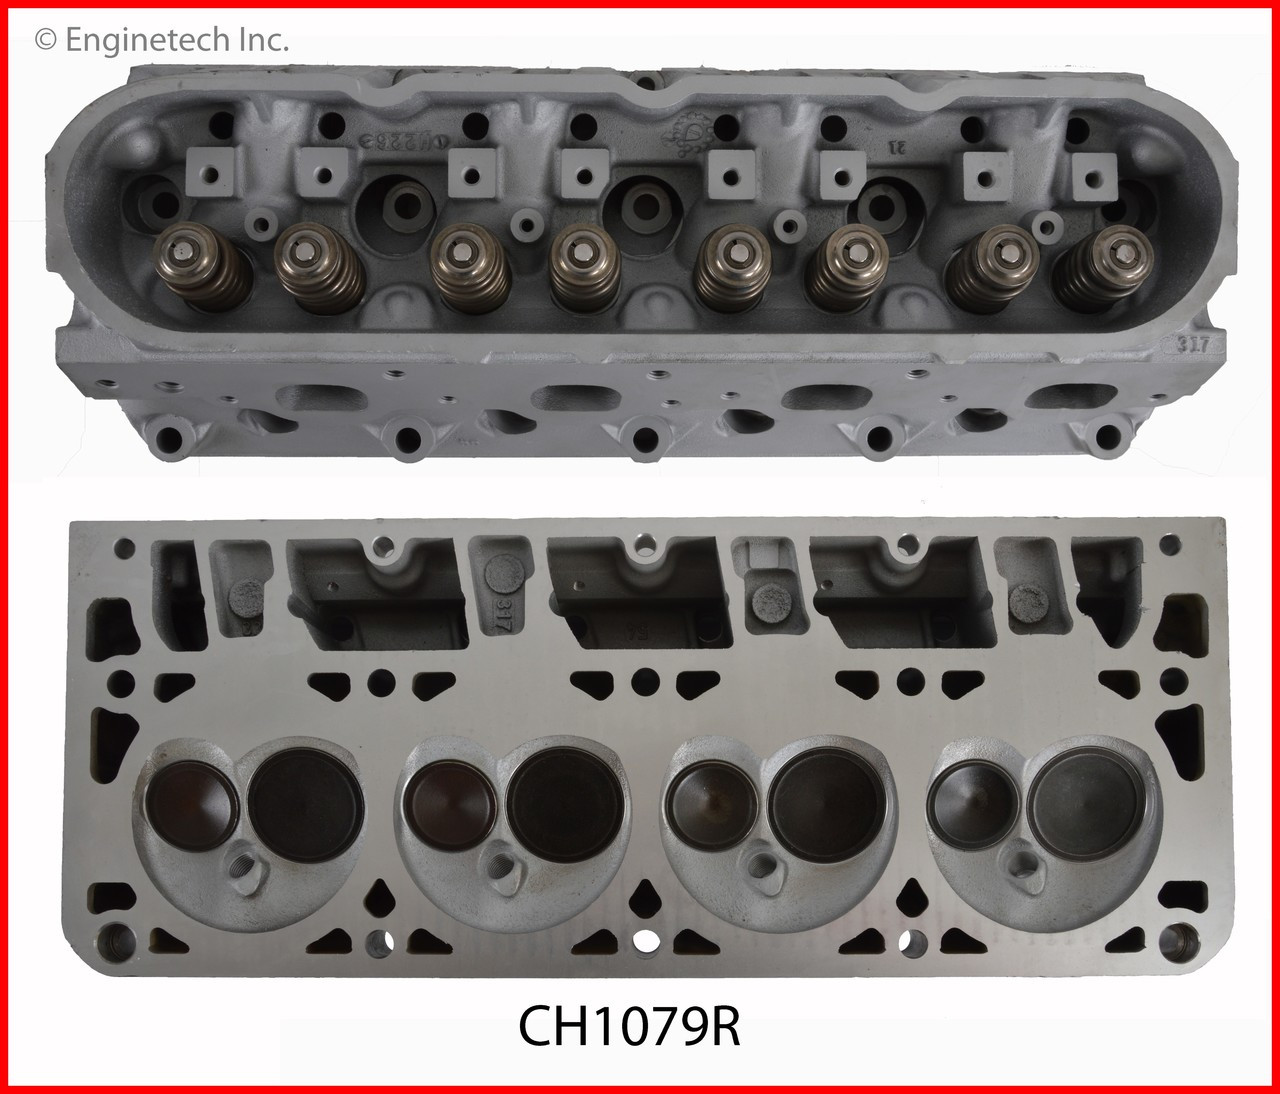 Cylinder Head Assembly - 2007 Chevrolet Avalanche 6.0L (CH1079R.K160)